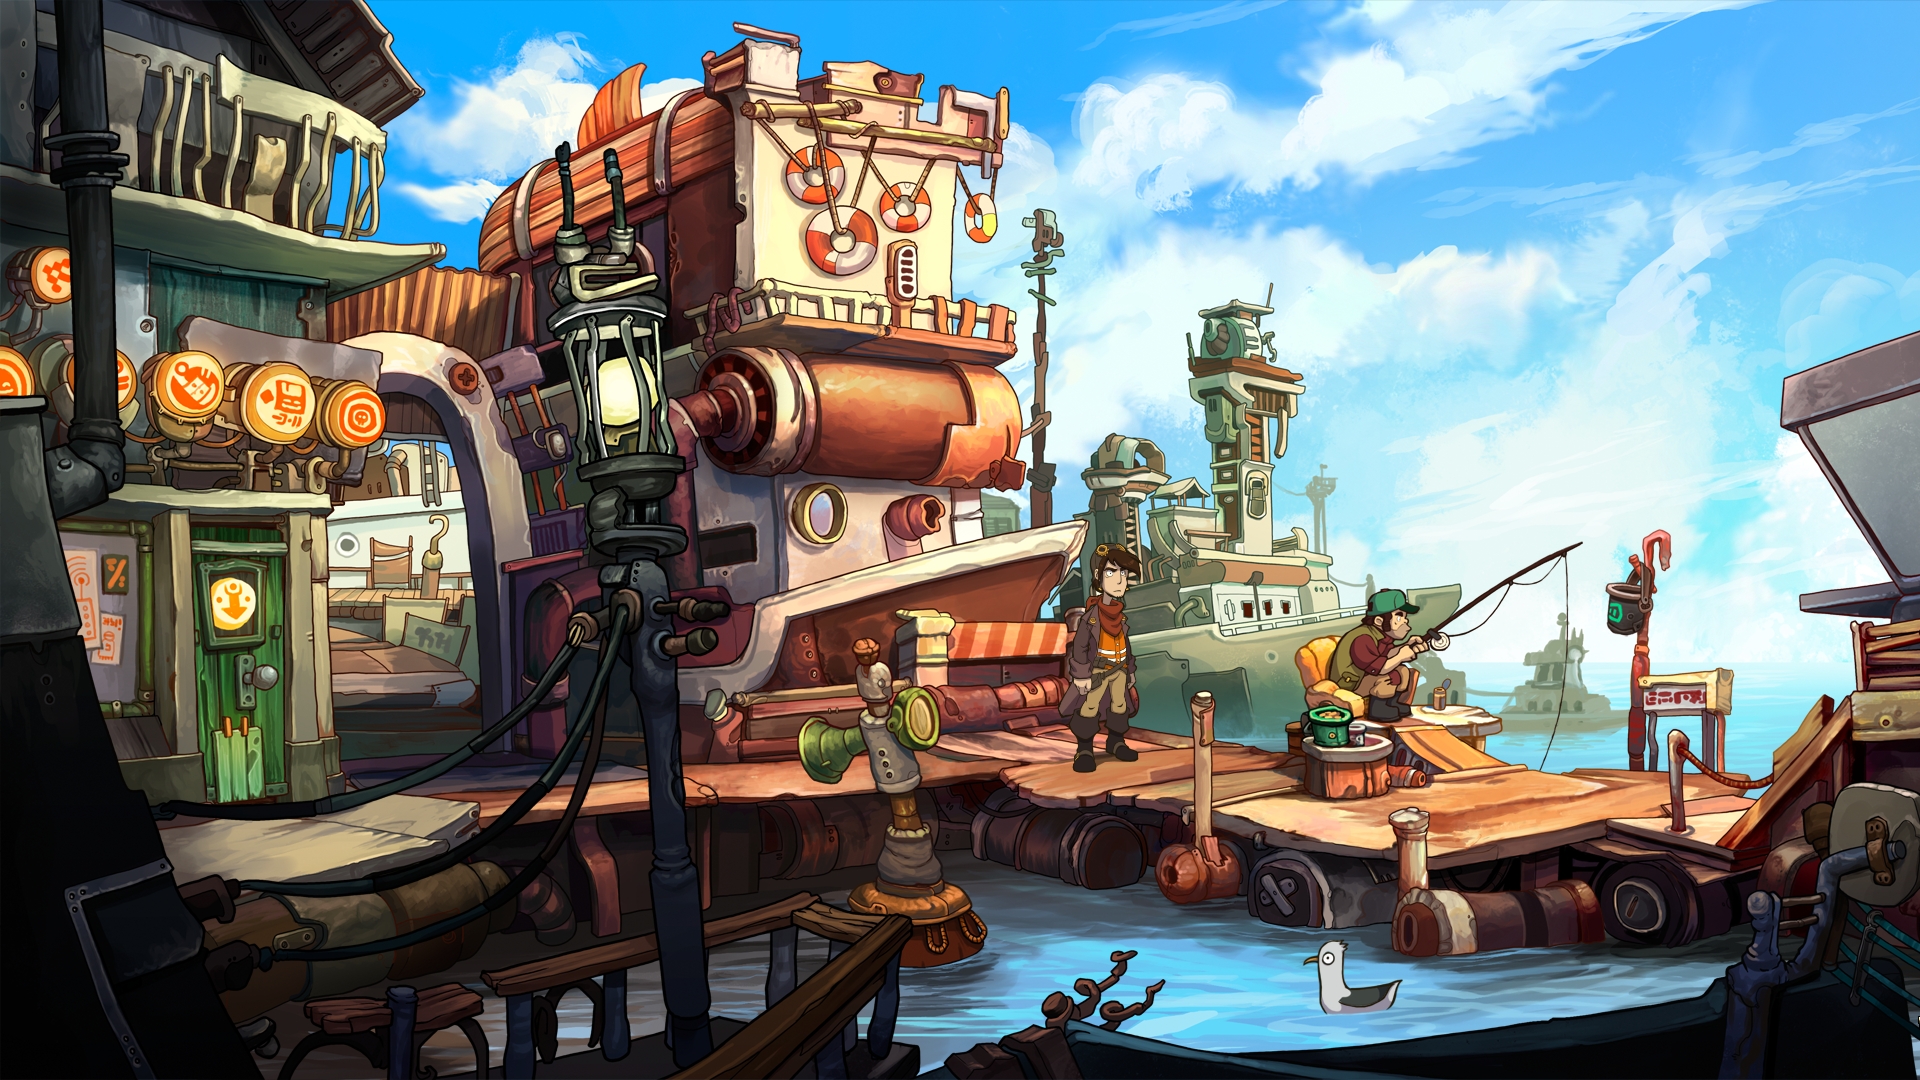 Deponia: The Complete Journey on Steam